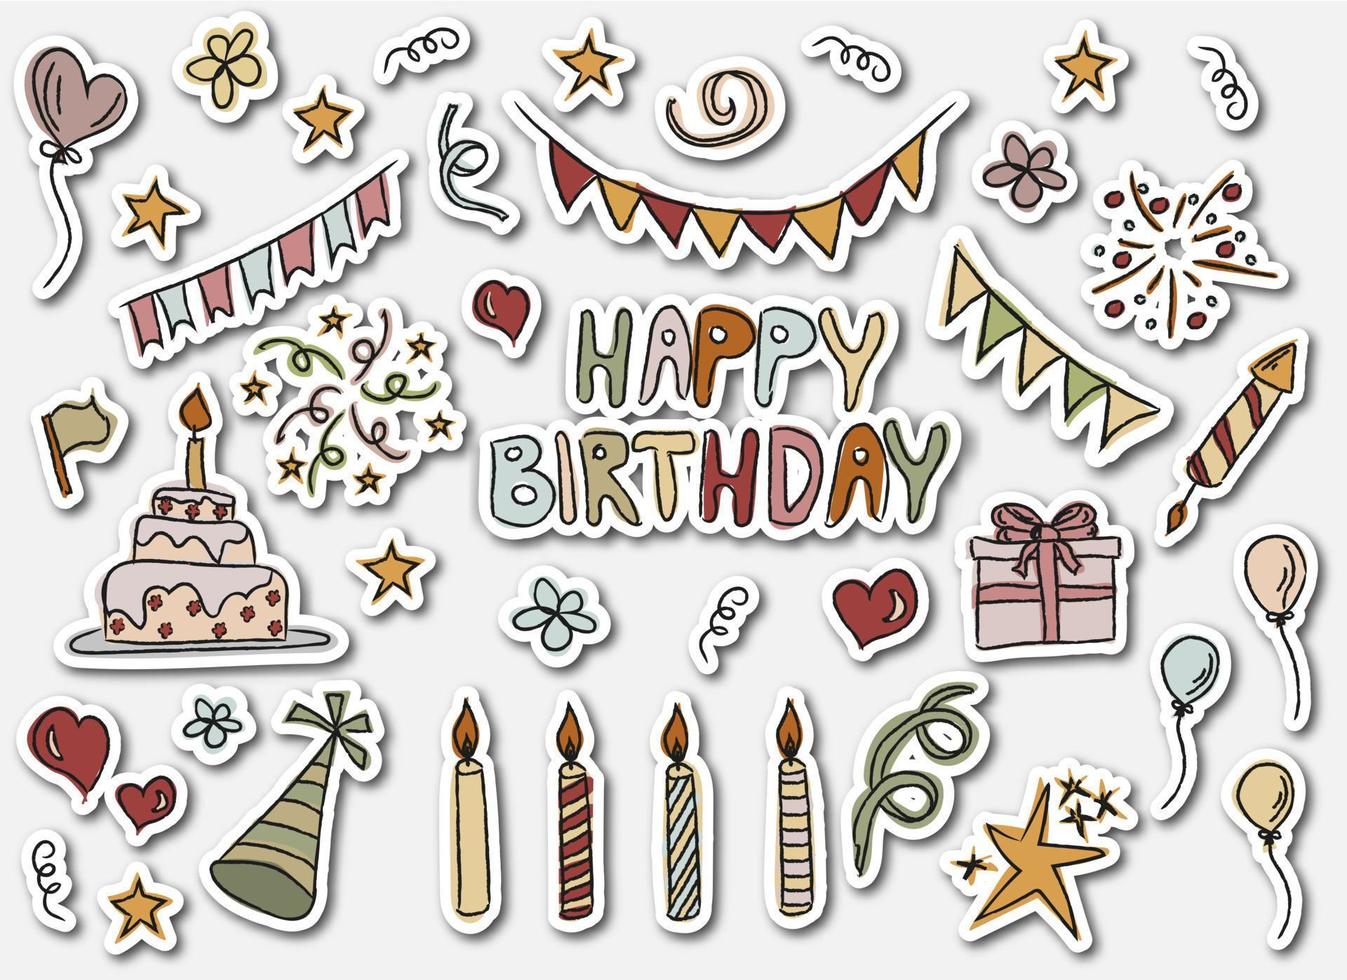 Birthday colorful stickers set in  doodle style vector